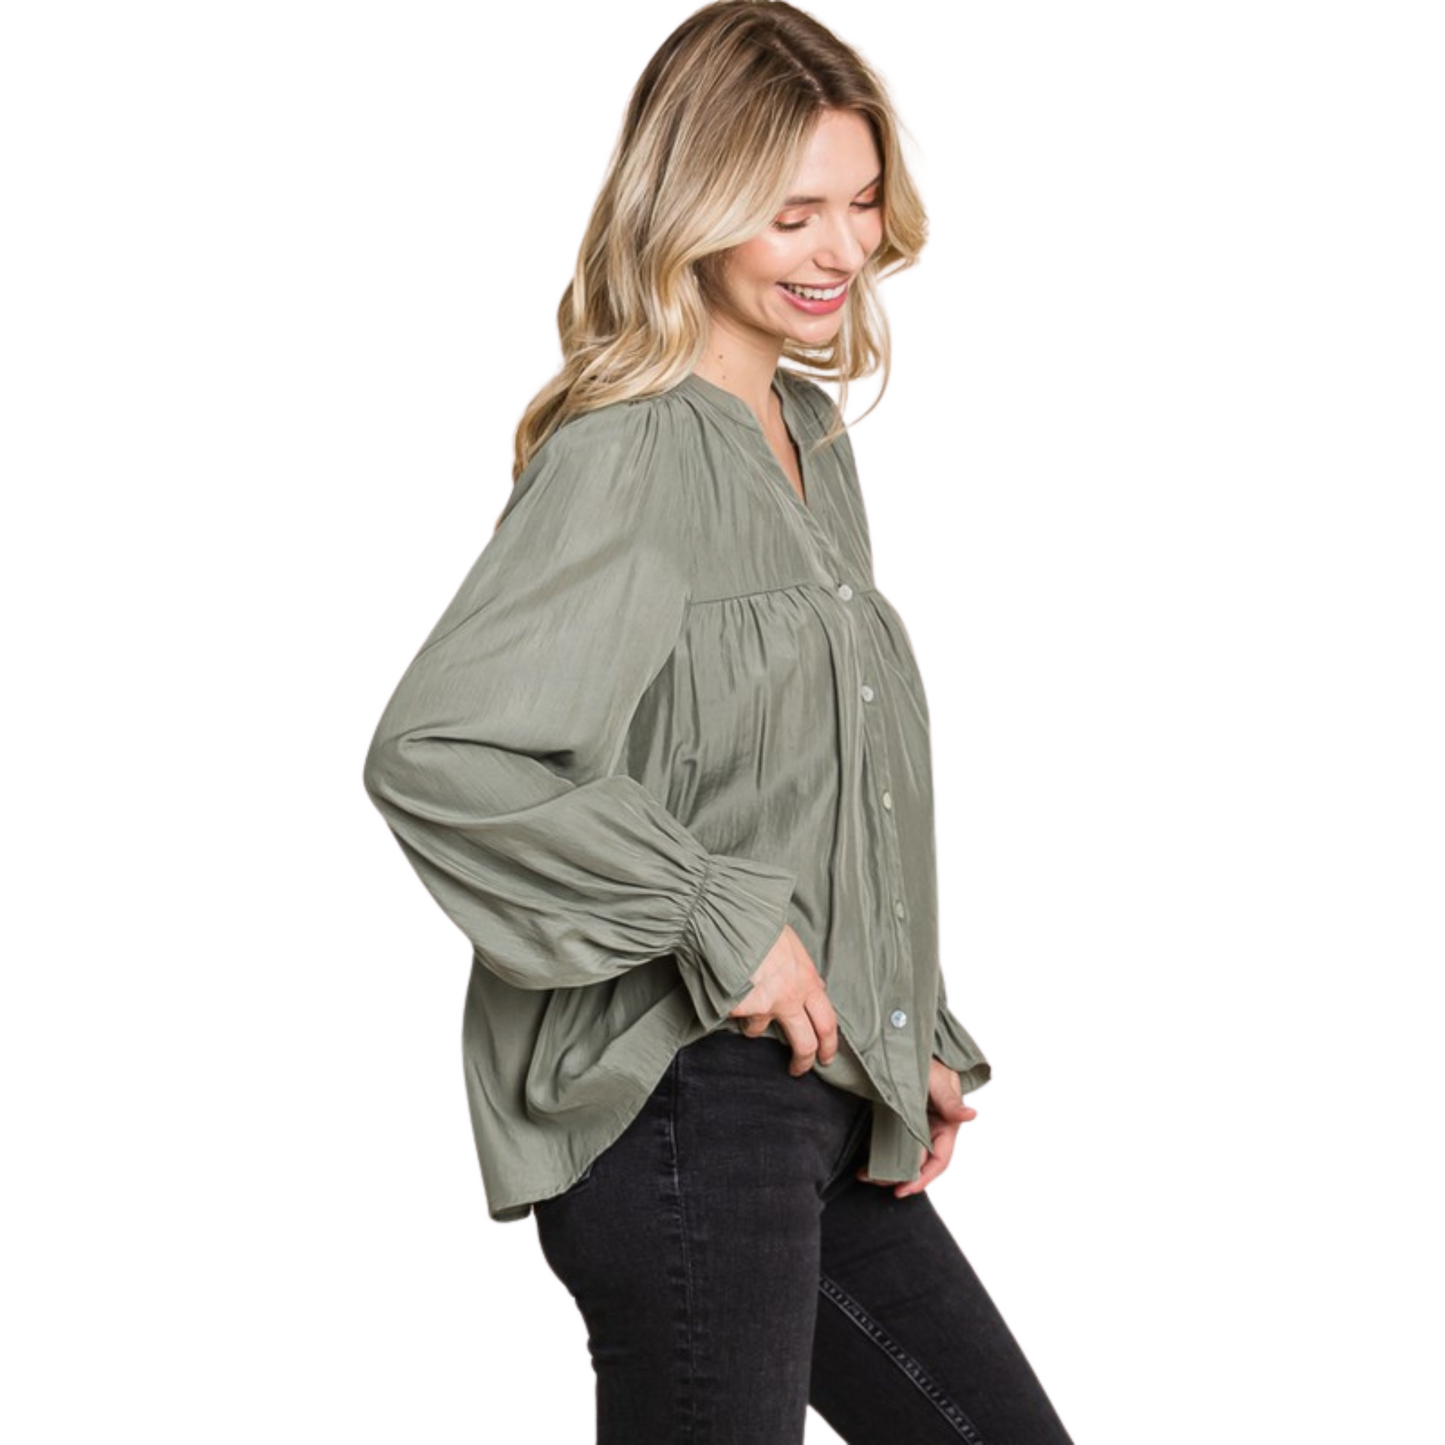 This Long Sleeve Button Down Top not only provides a classic and professional look, but also an easy accessibility to any outfit. Made from lightweight material, it comes in two colors, sage and black, making it an easily matching option in any wardrobe. It features a flattering v neckline and a button-down closure for the perfect finish.